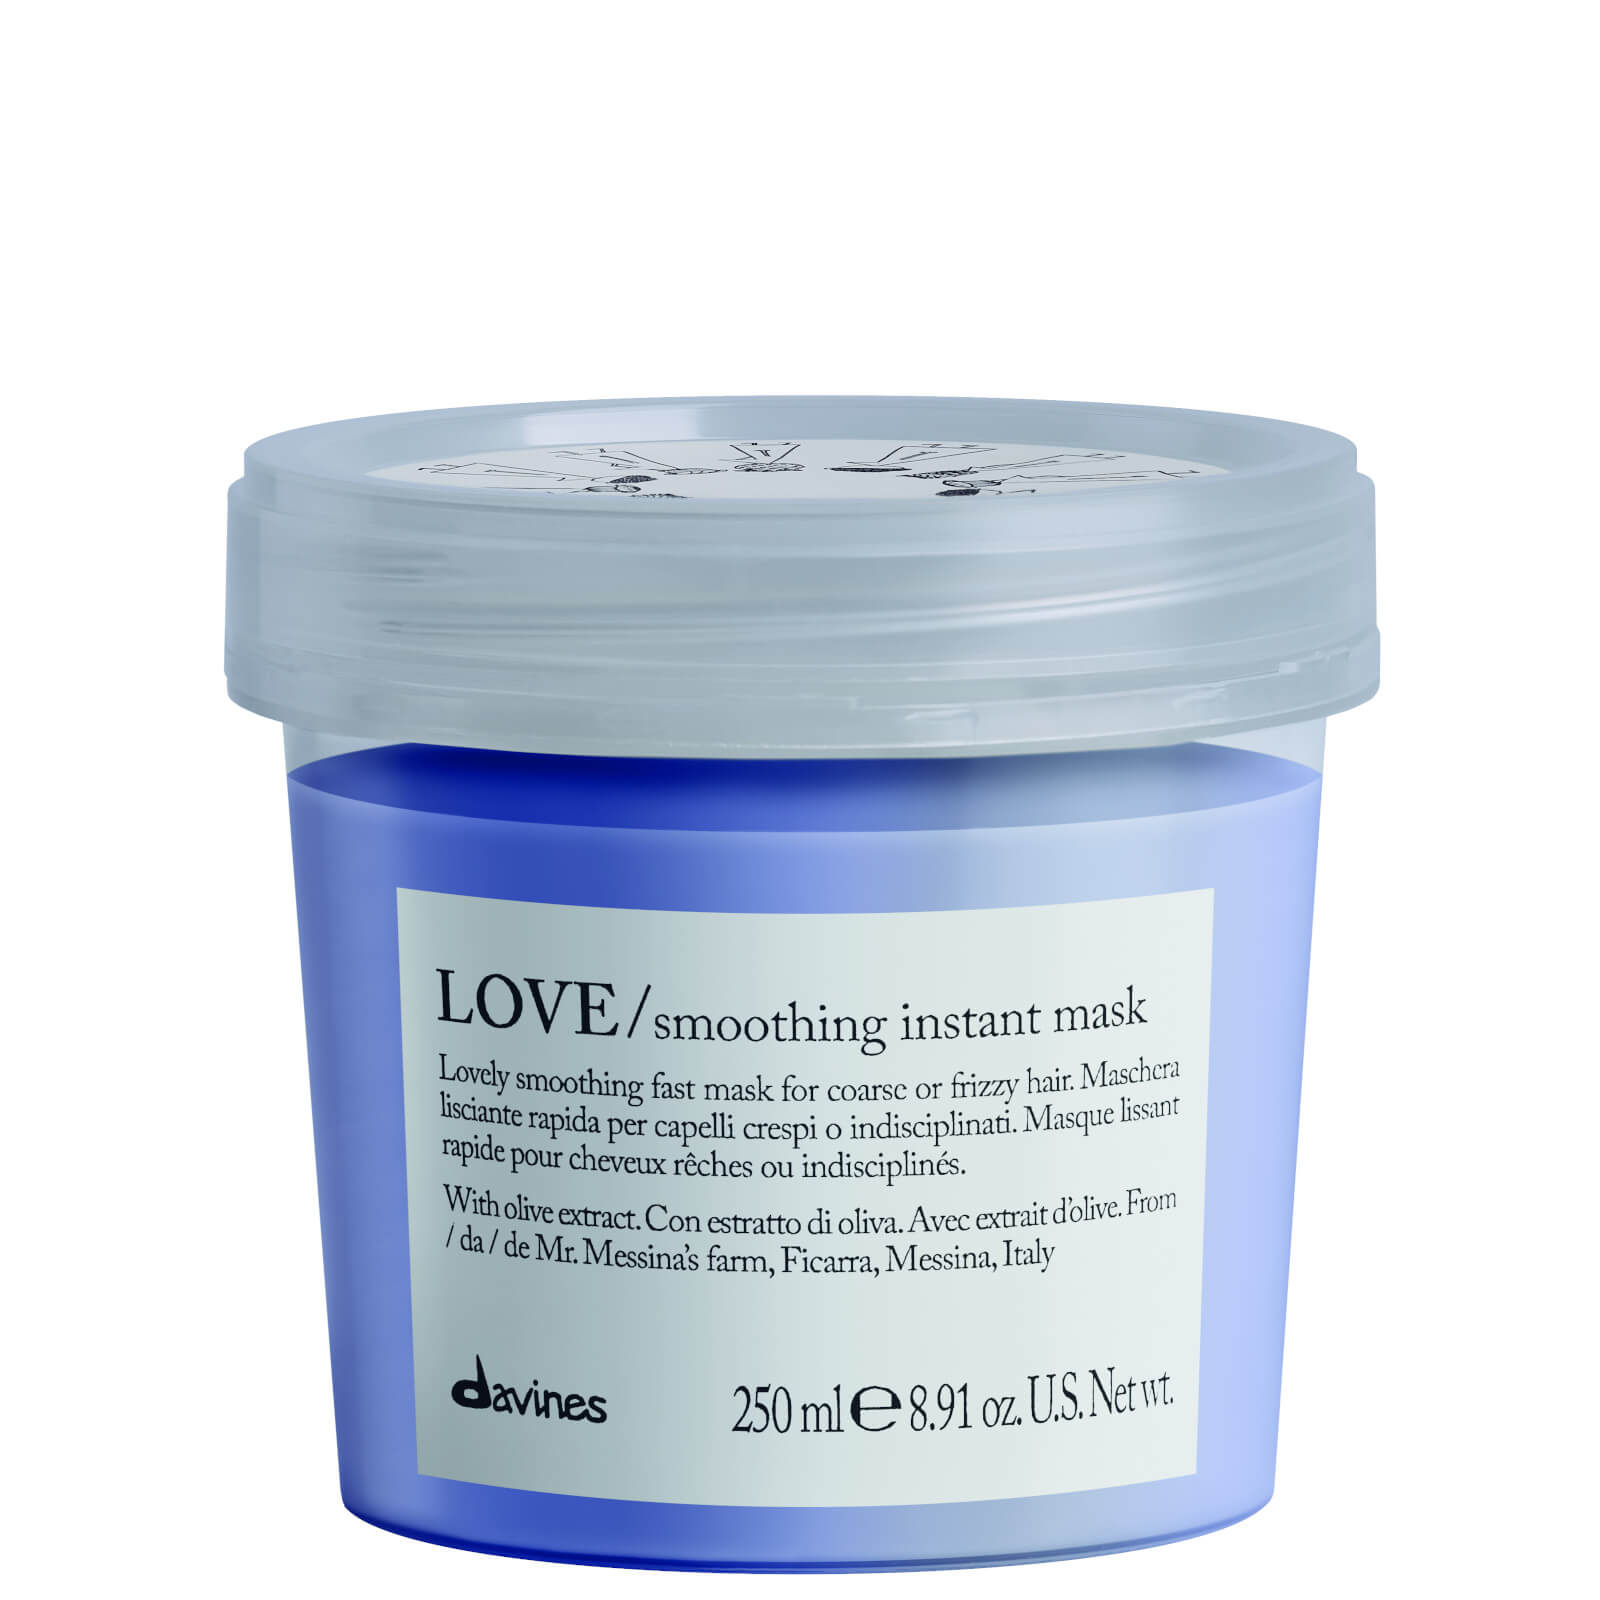 Photos - Facial Mask Davines Love/ Smoothing Instant Mask 250ml 